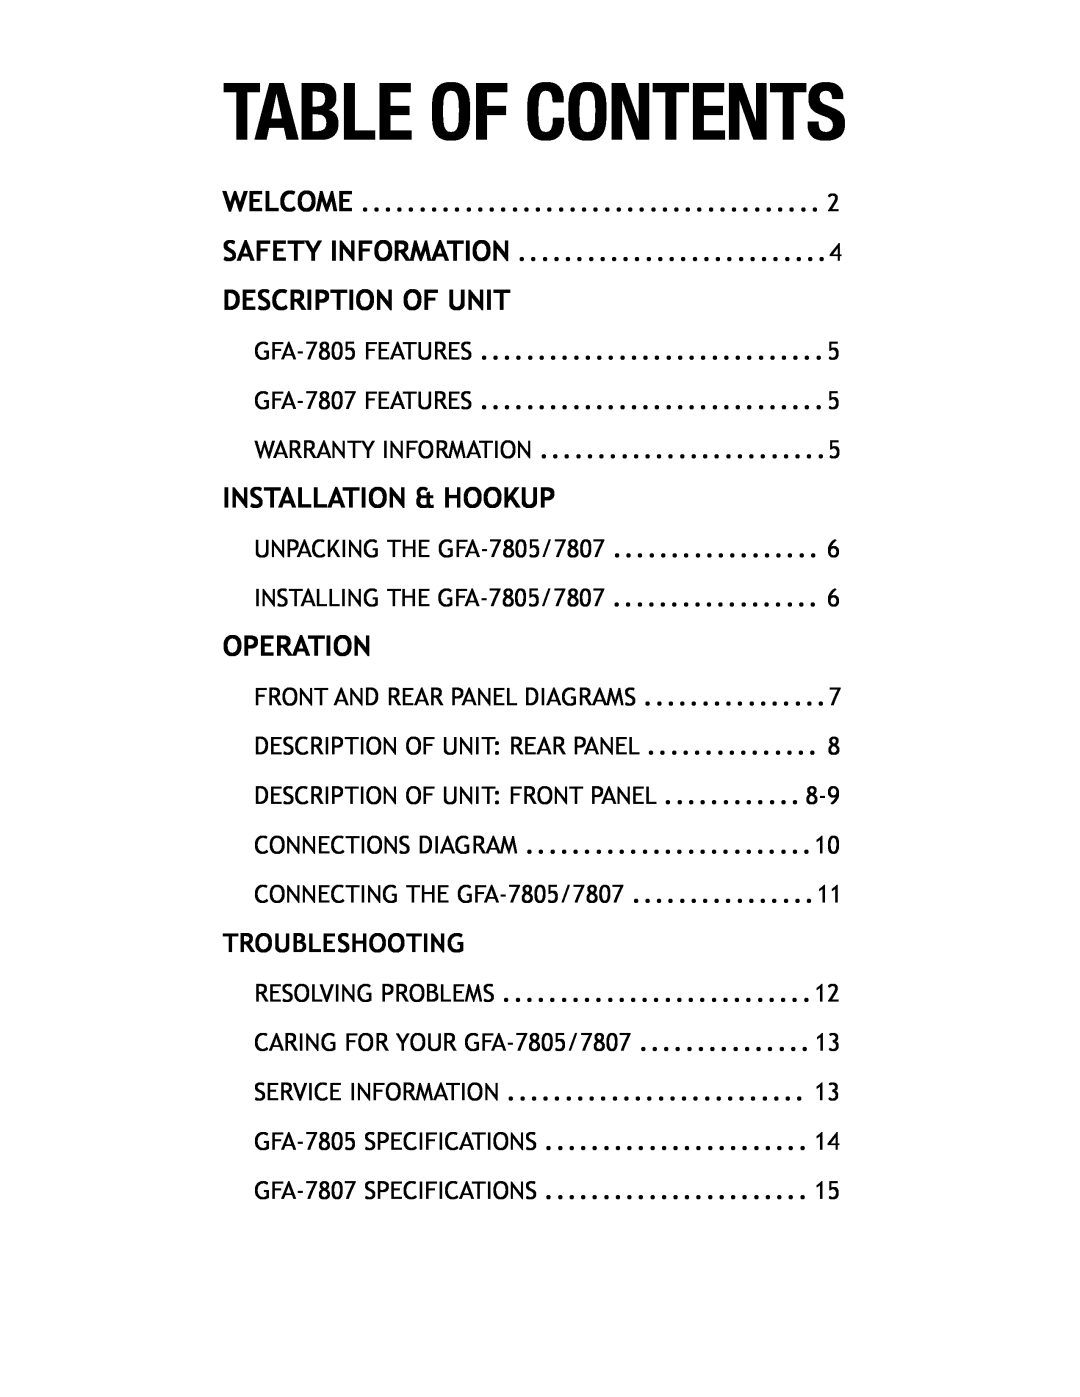 Adcom GFA7807 Table Of Contents, Description Of Unit, Installation & Hookup, Operation, Troubleshooting, Welcome 